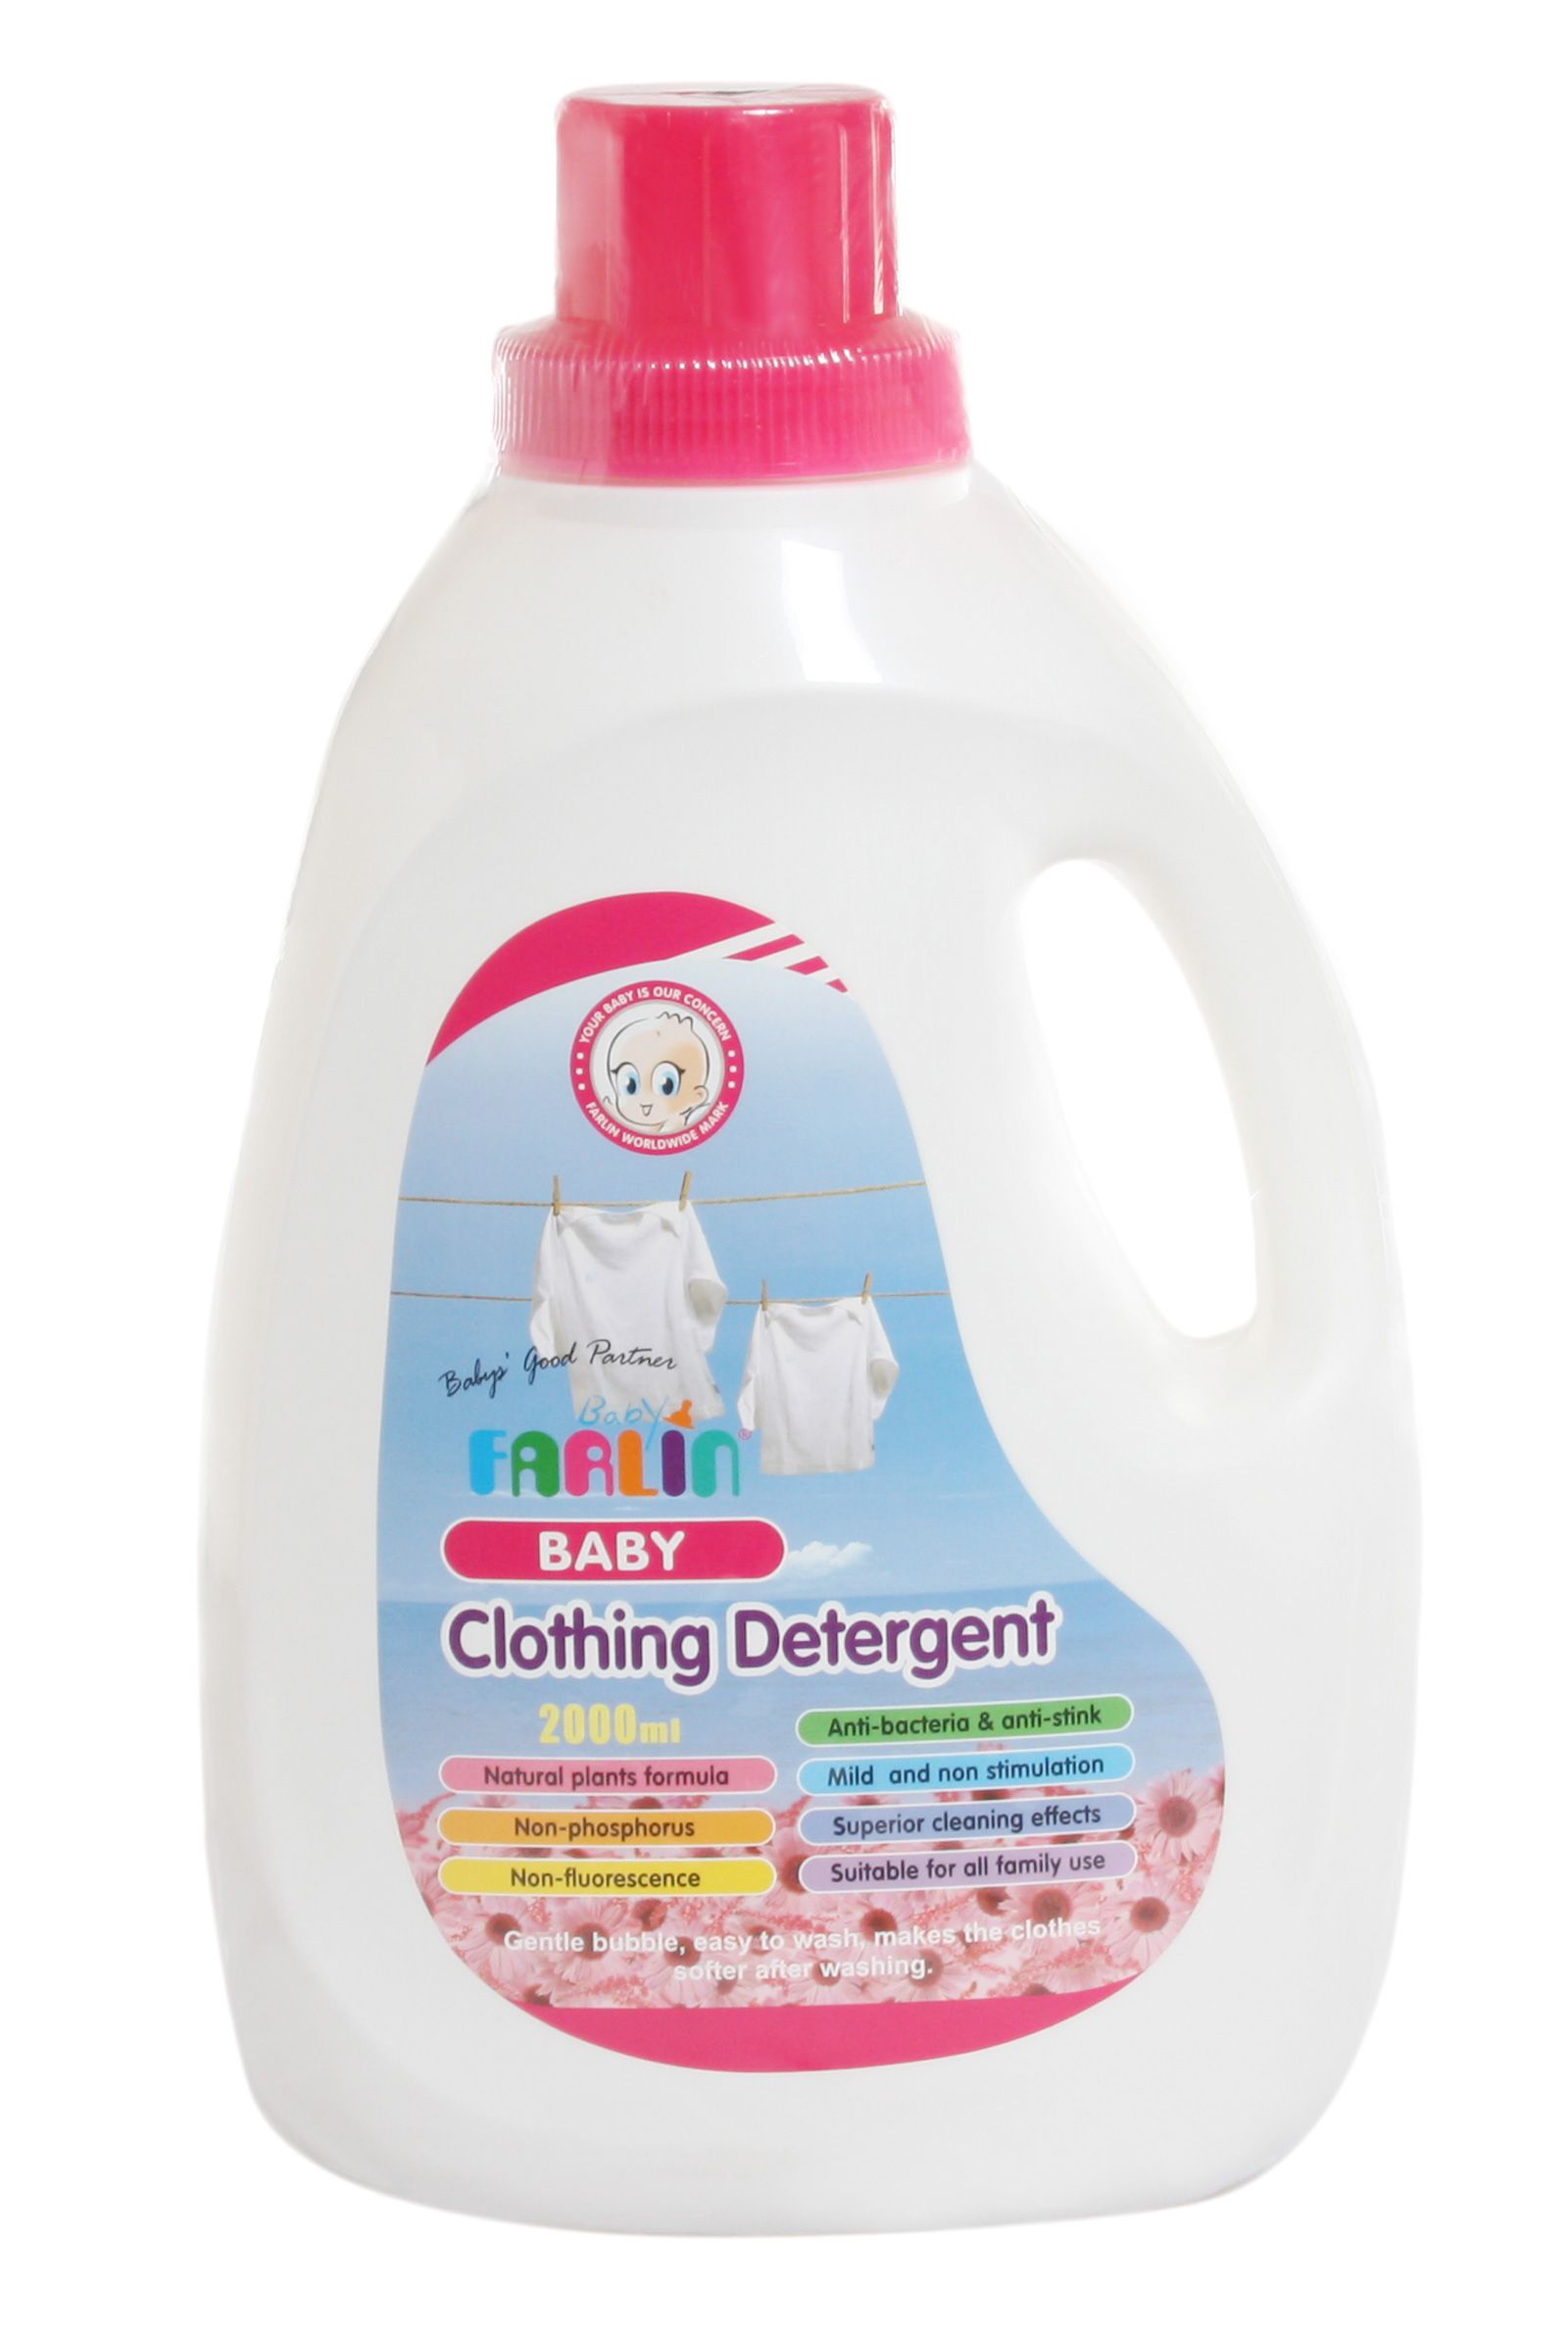 Farlin - Baby Clothing Detergent